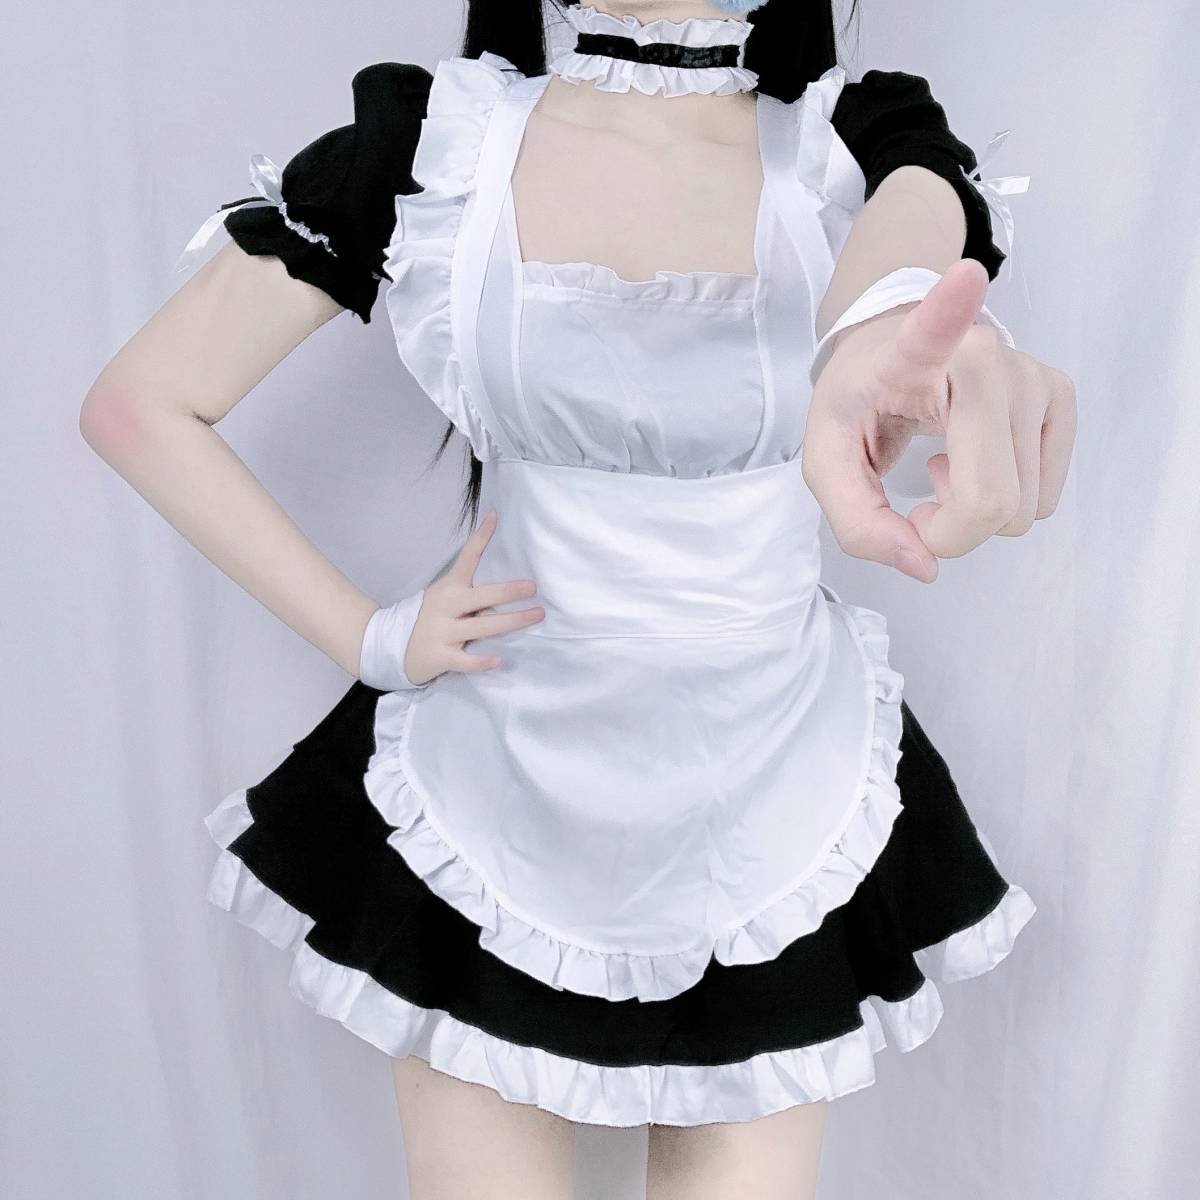 [.] lady's made clothes Lolita lovely an educational institution festival Halloween festival Event costume play clothes 